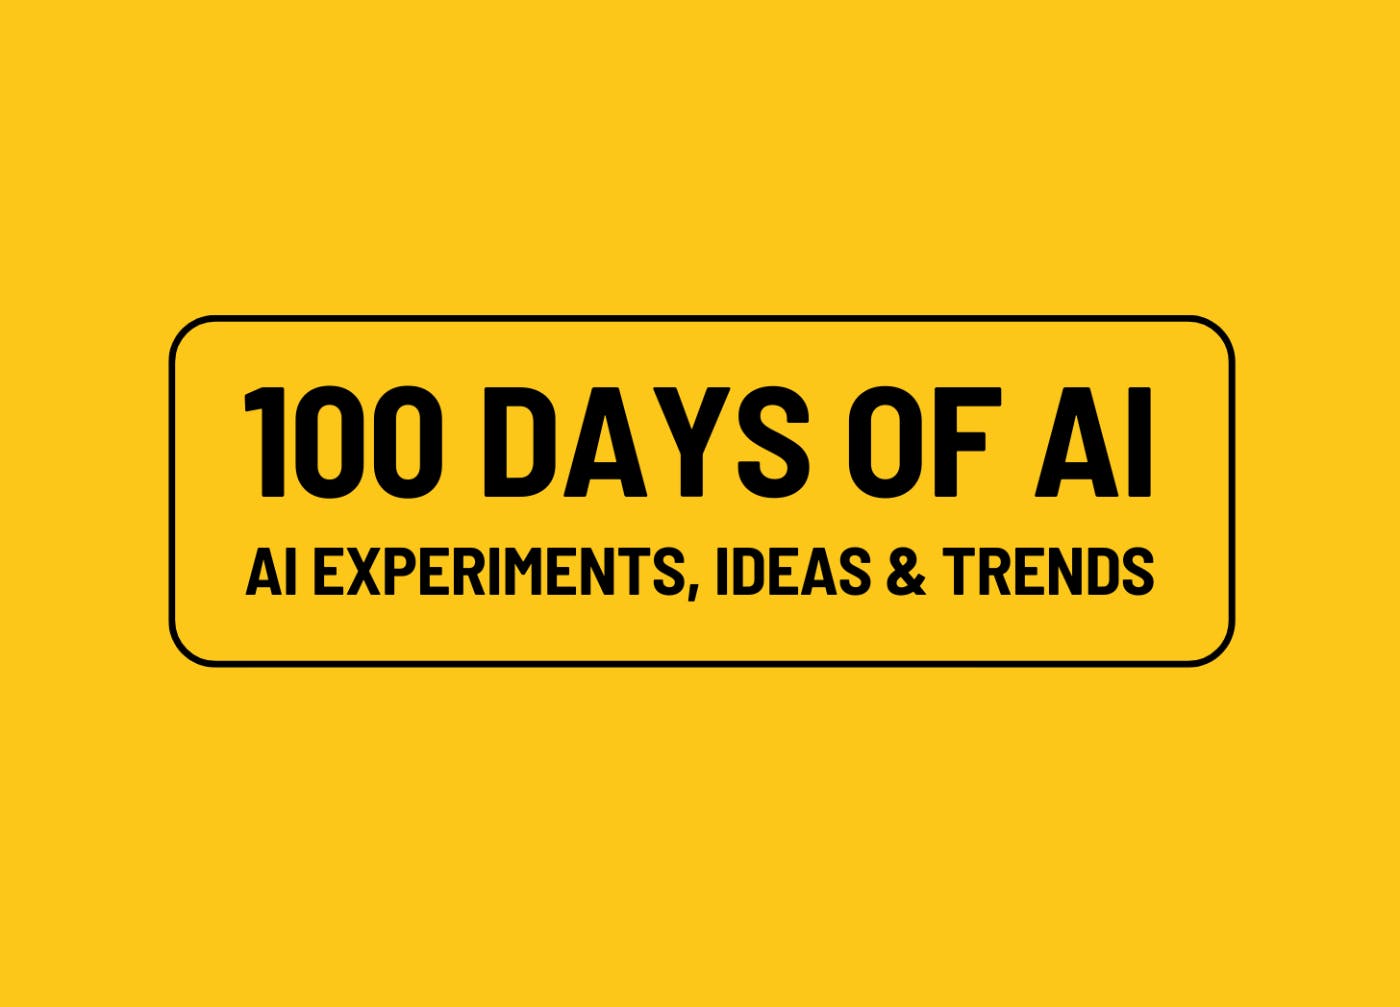 https://cdn.aisys.pro/stories/100-days-of-ai-day-10-how-effective-is-ai-in-design-thinking-for-solving-business-problems.jpg